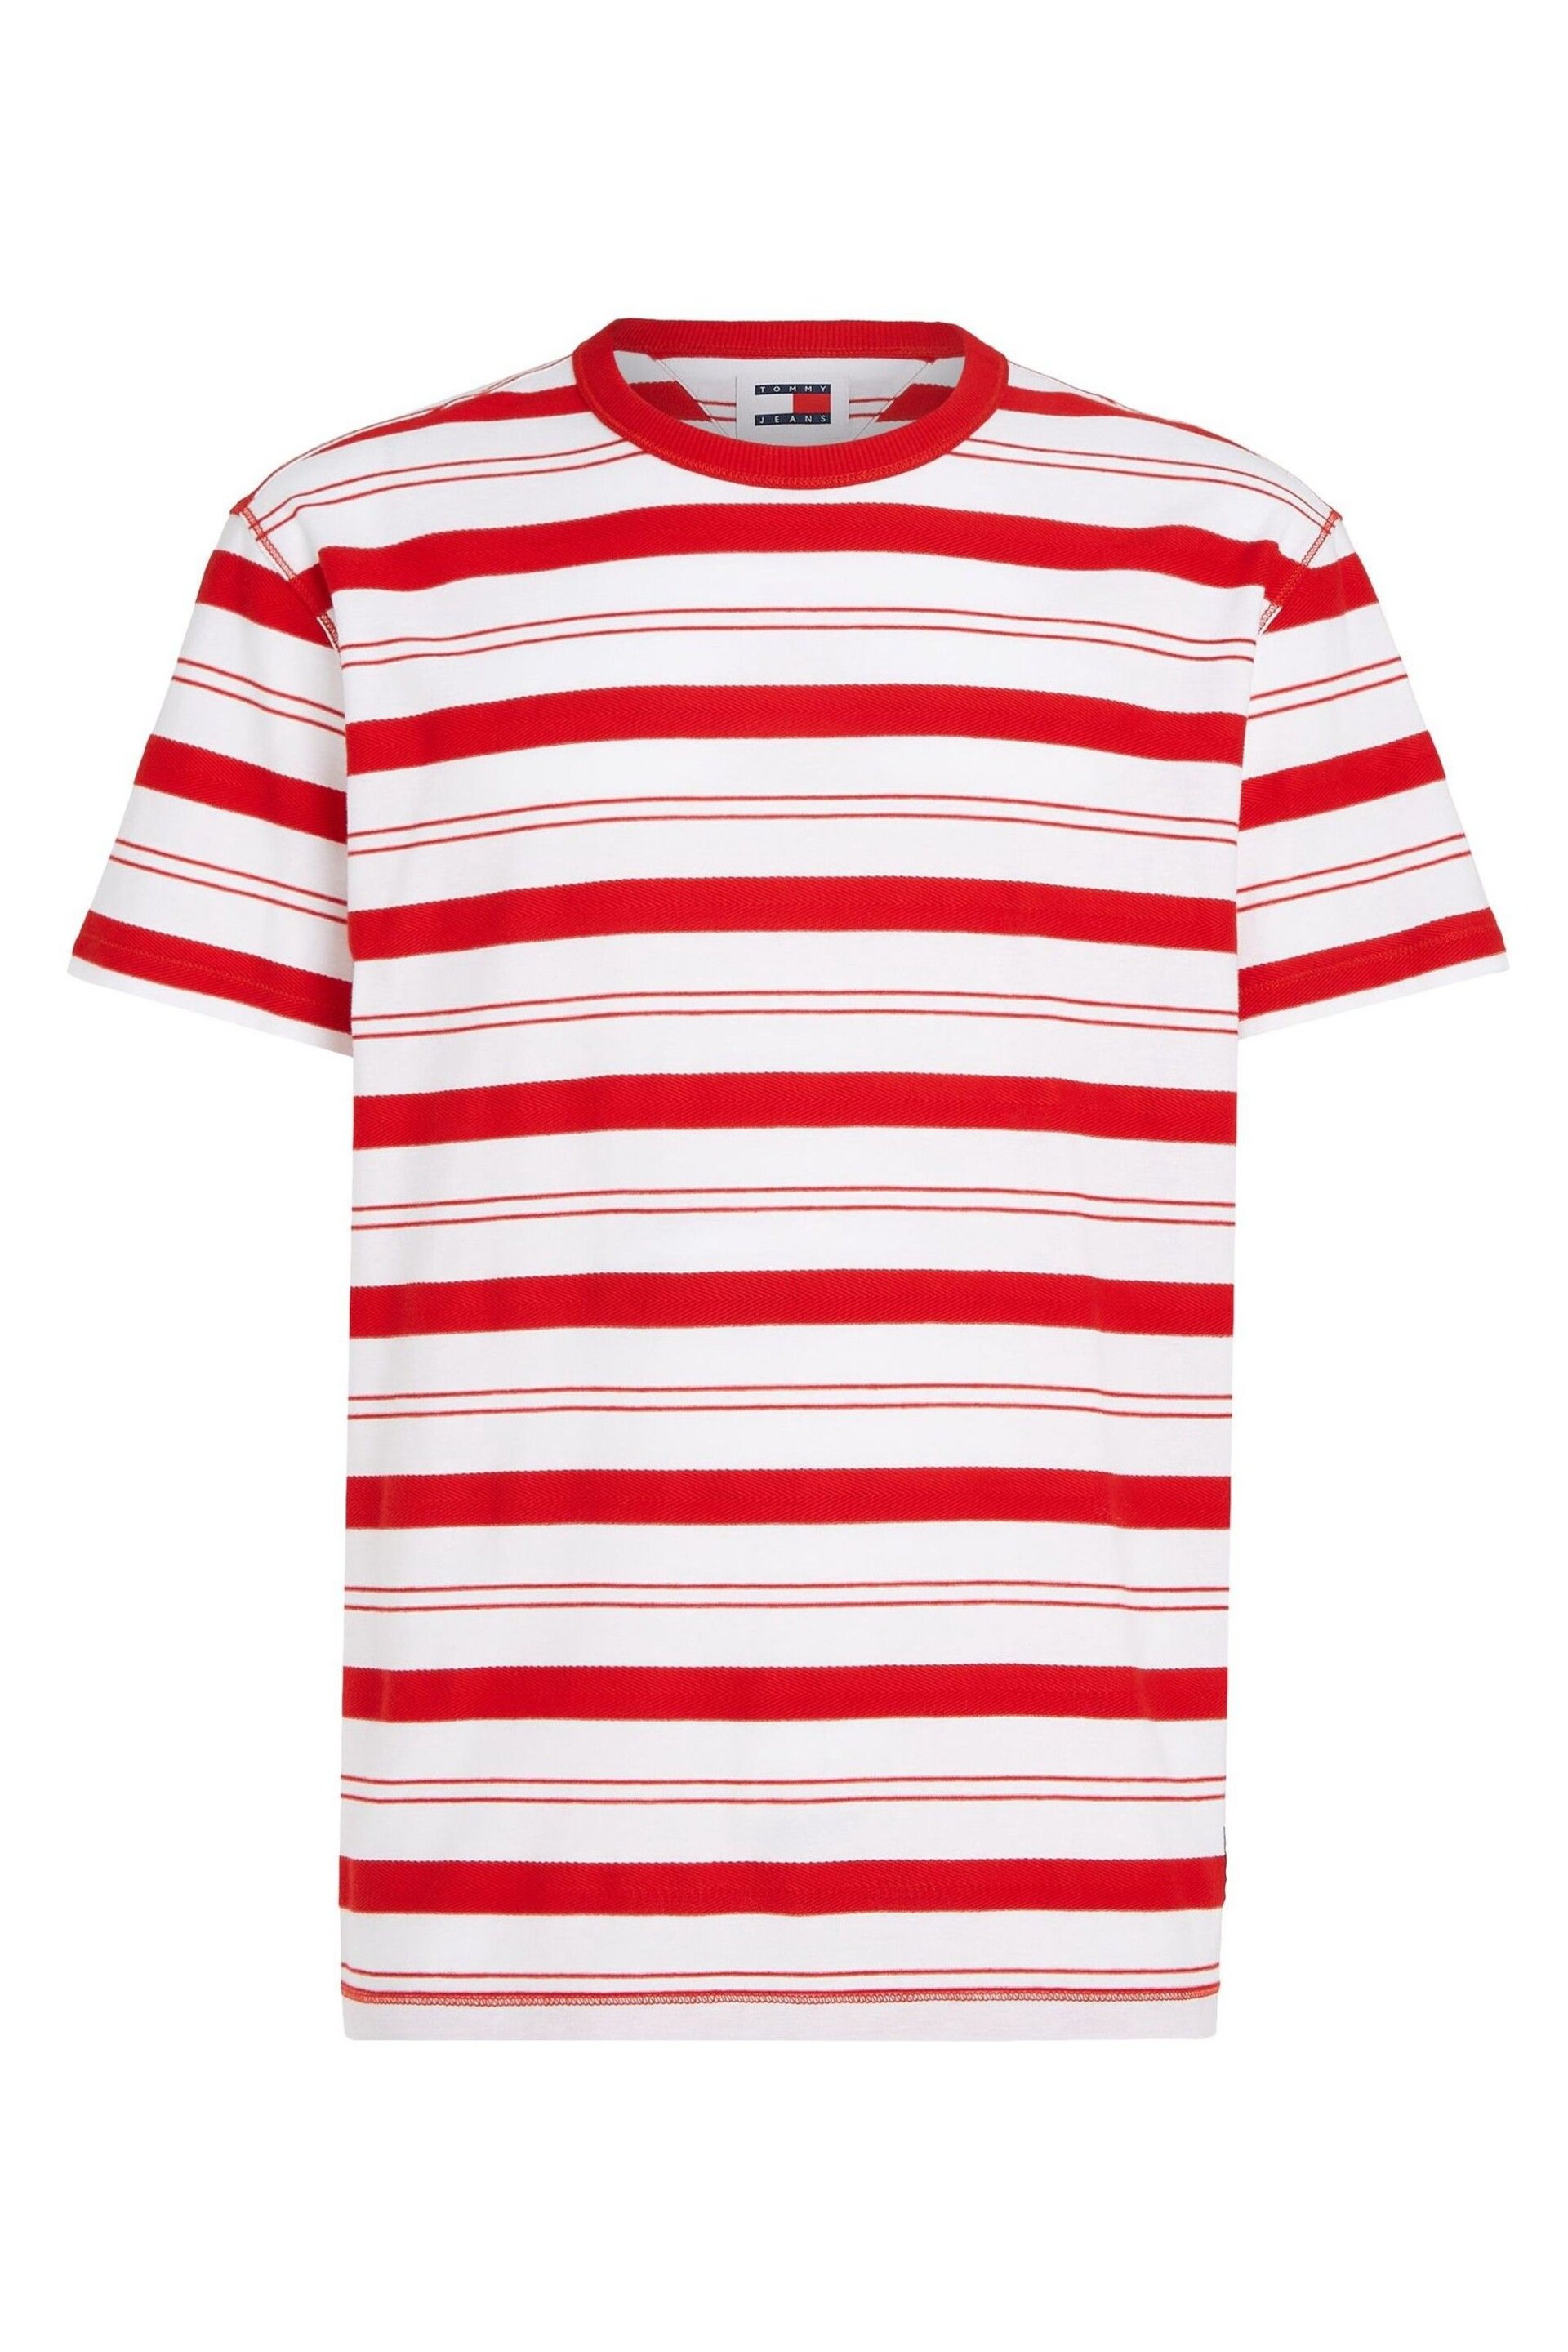 Tommy Jeans Red Stripe T-Shirt - Image 7 of 8